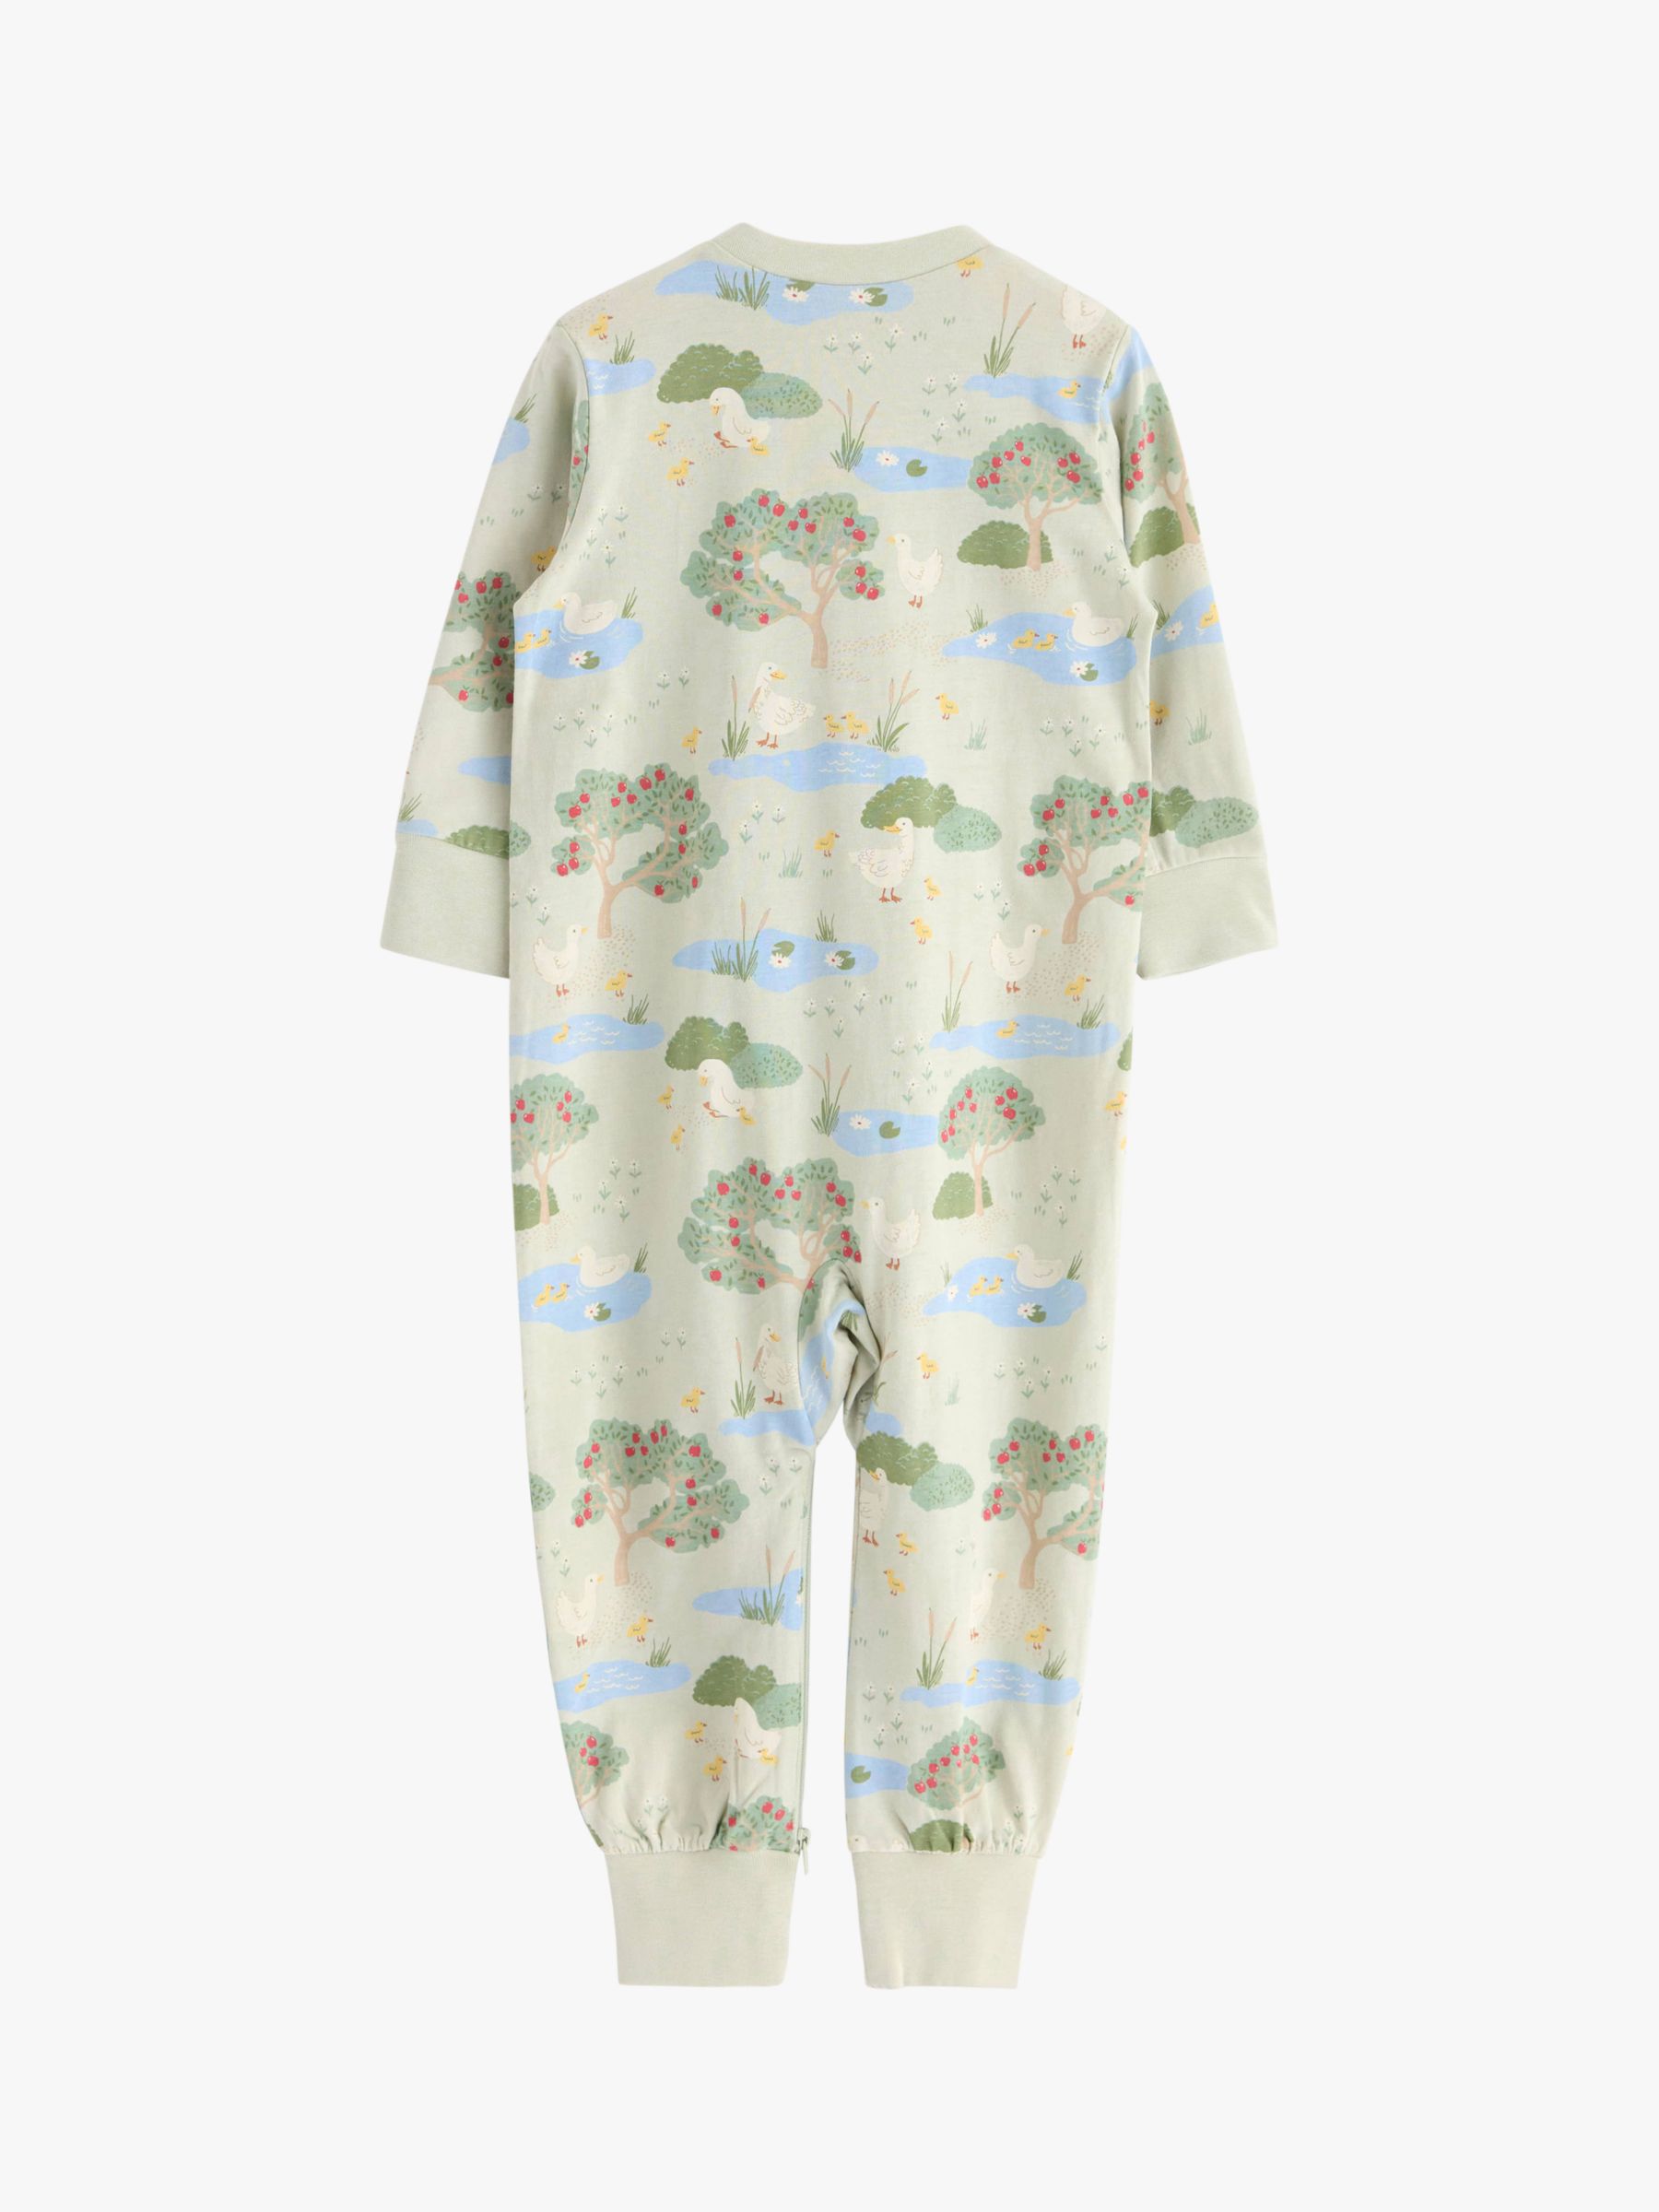 Buy Lindex Baby Organic Cotton Landscape Print All-in-One Pyjamas, Light Green Online at johnlewis.com